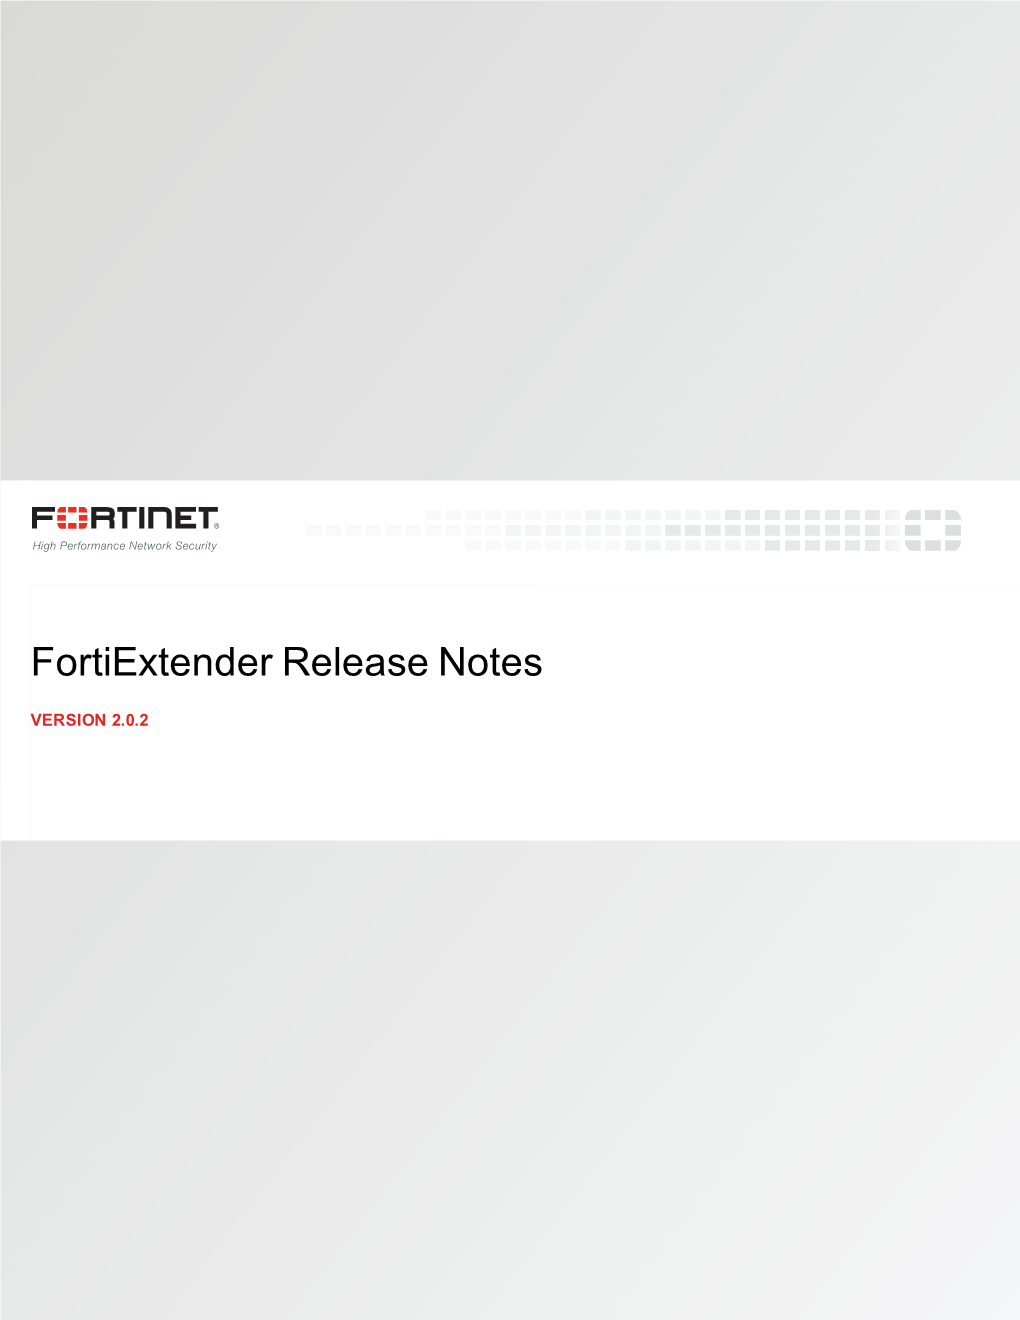 Fortiextender 2.0.2 Release Notes 36-202-292893-20150918 TABLE of CONTENTS